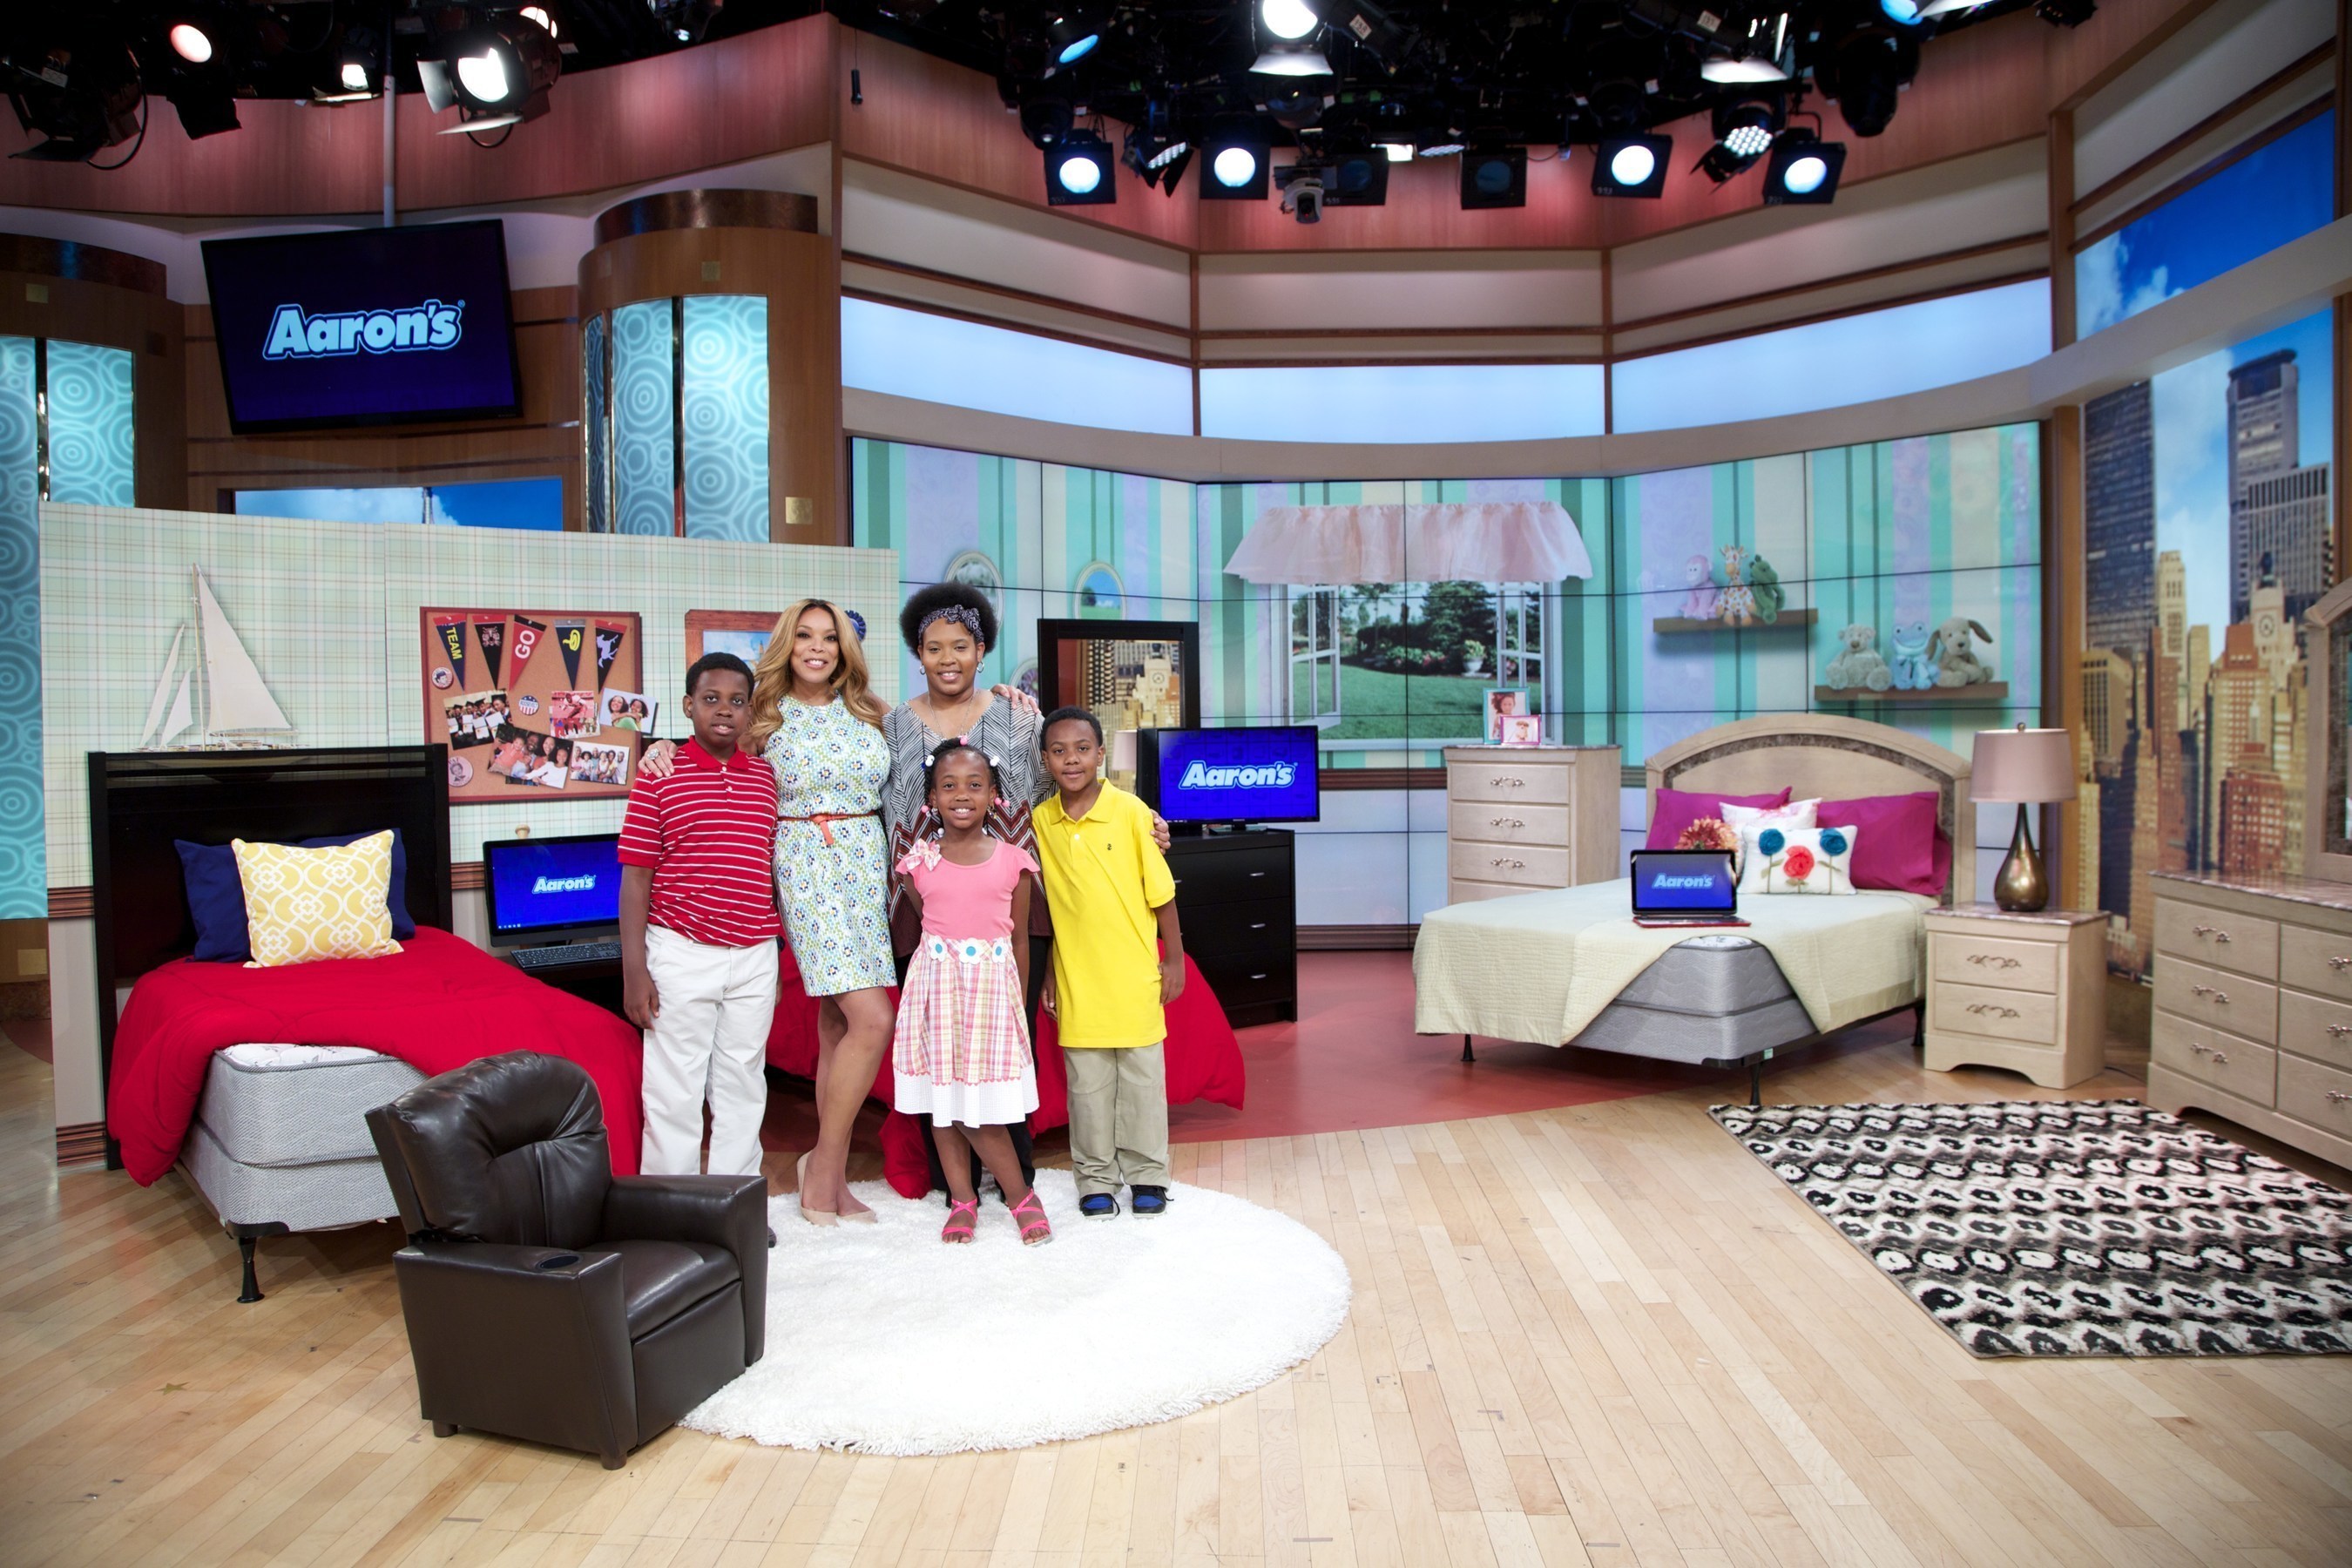 Aaron's and The Wendy Williams Show make over two children's bedrooms complete with furniture and electronics for Louisiana resident and Hurricane Isaac survivor Latasha Lee and her family as a part of the 'Win a Room in June' contest.